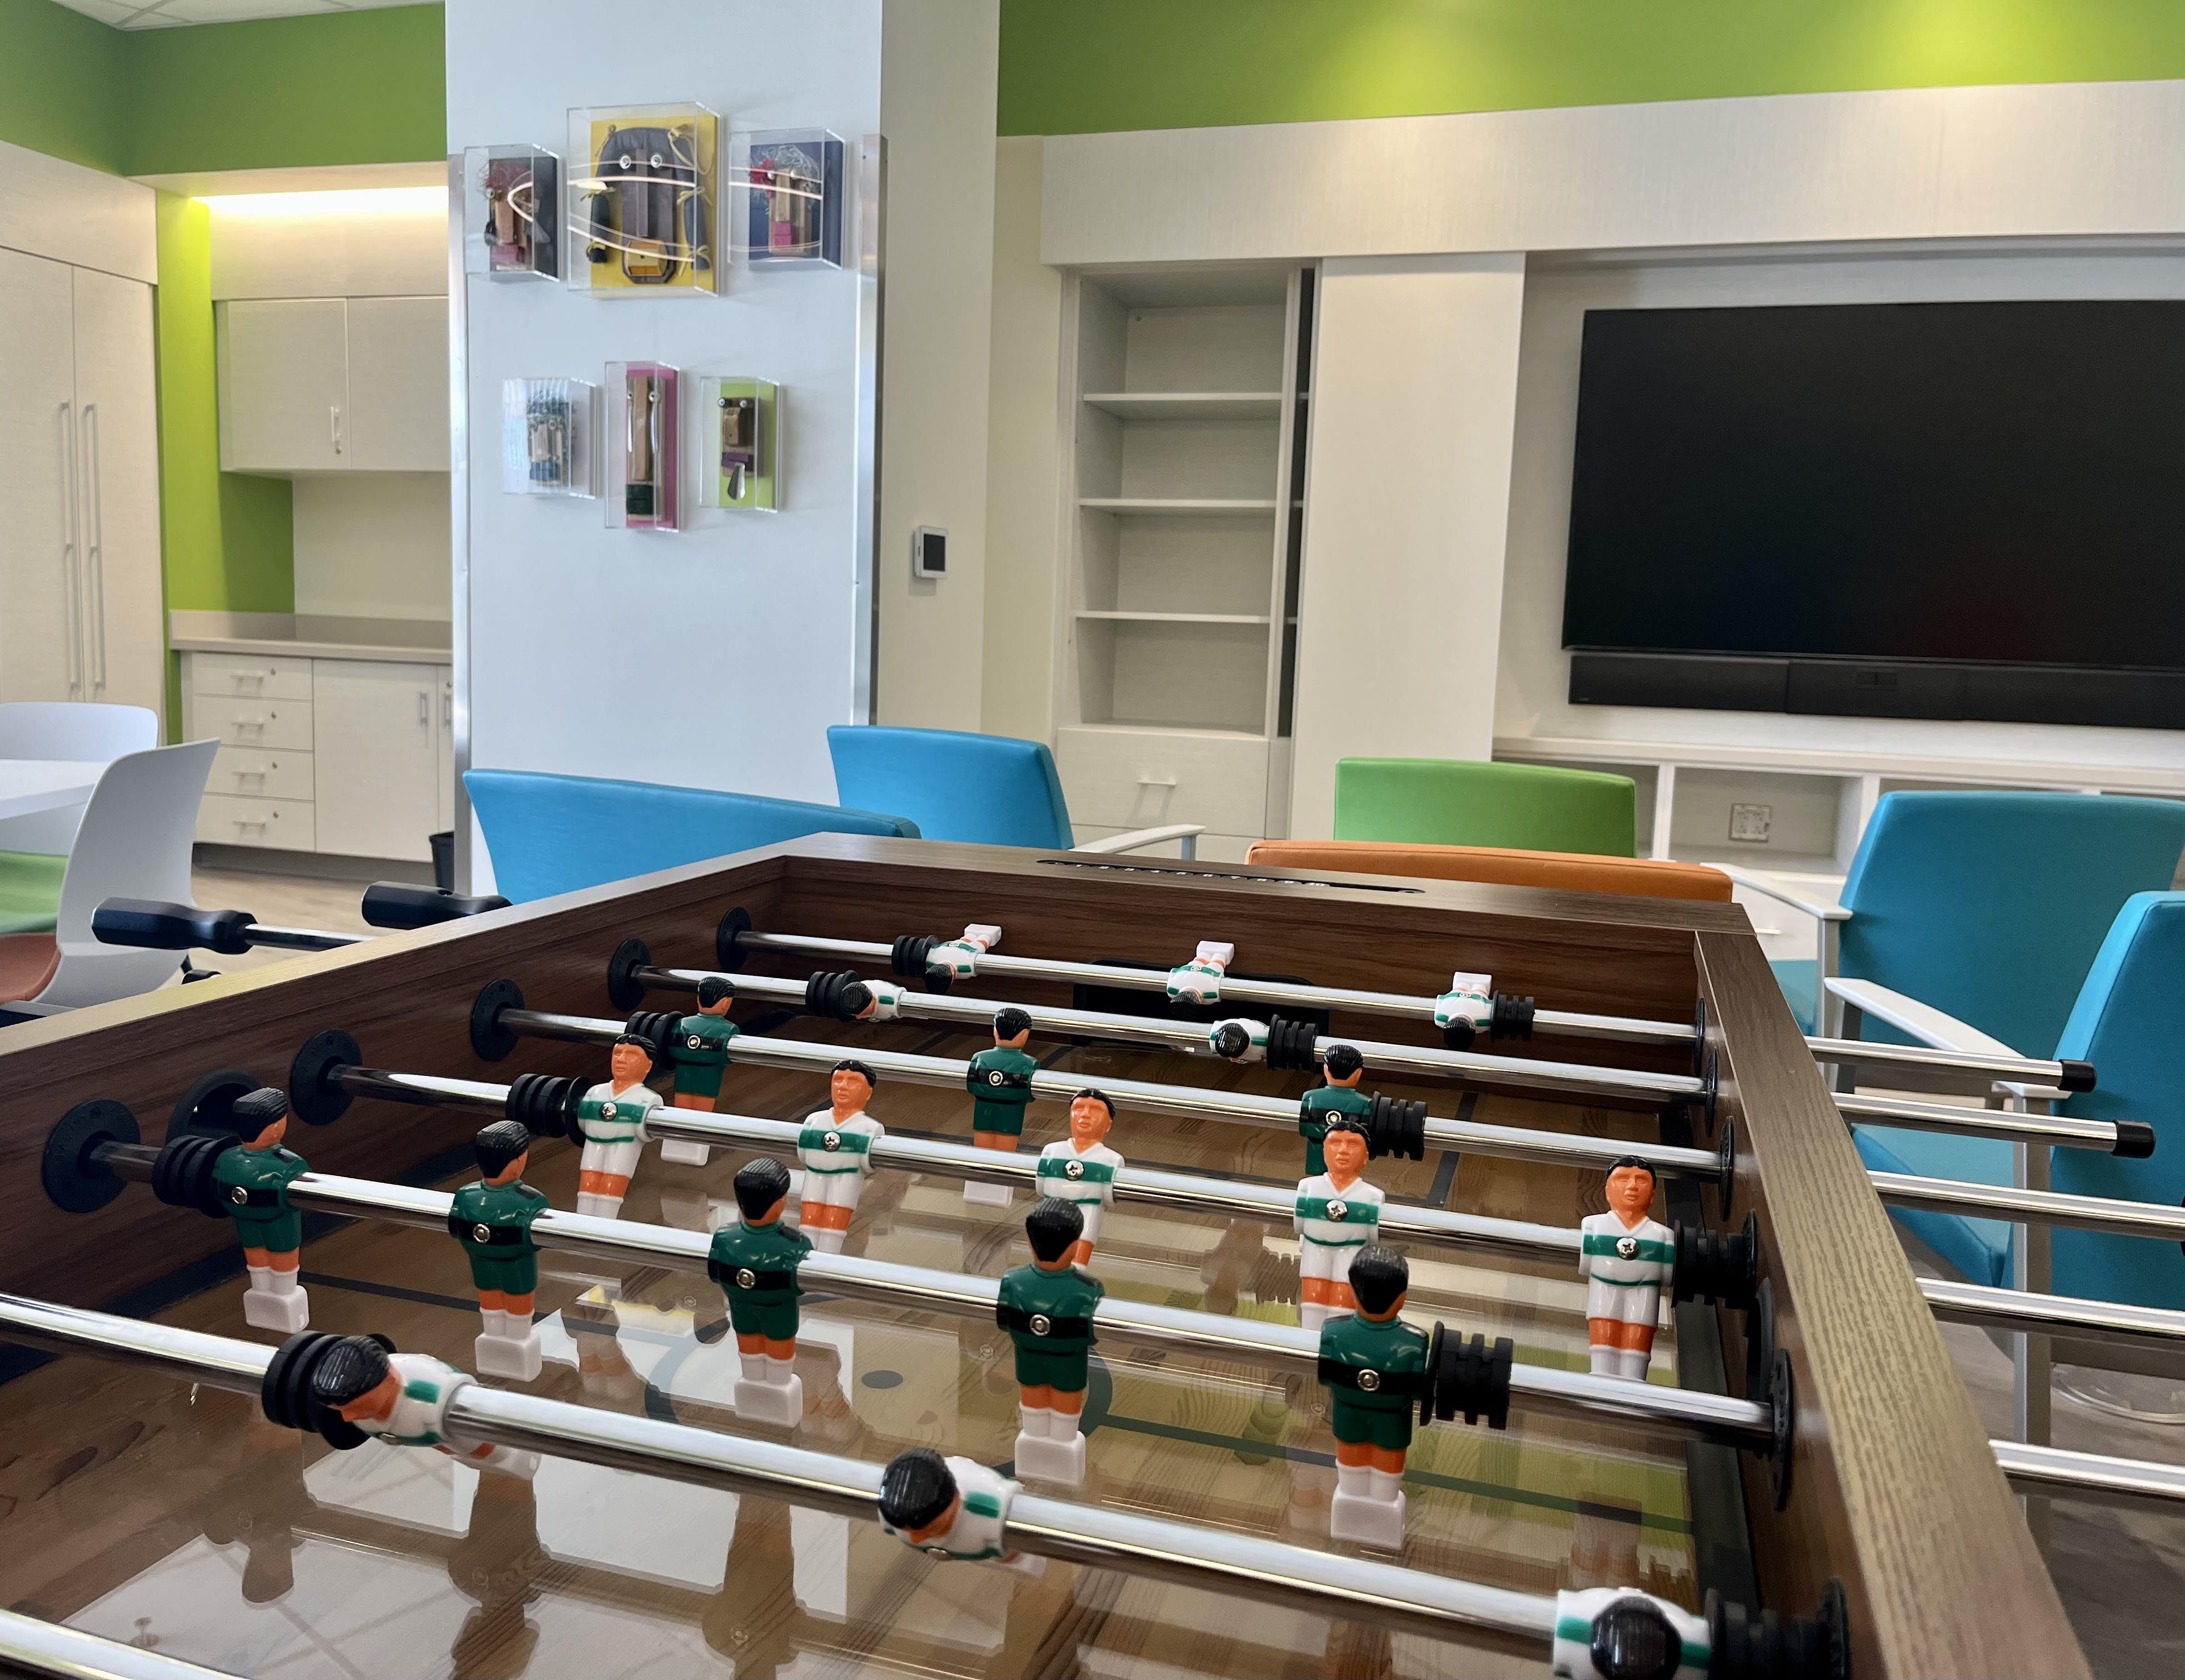 A fooseball table in a play room at the new hospital.